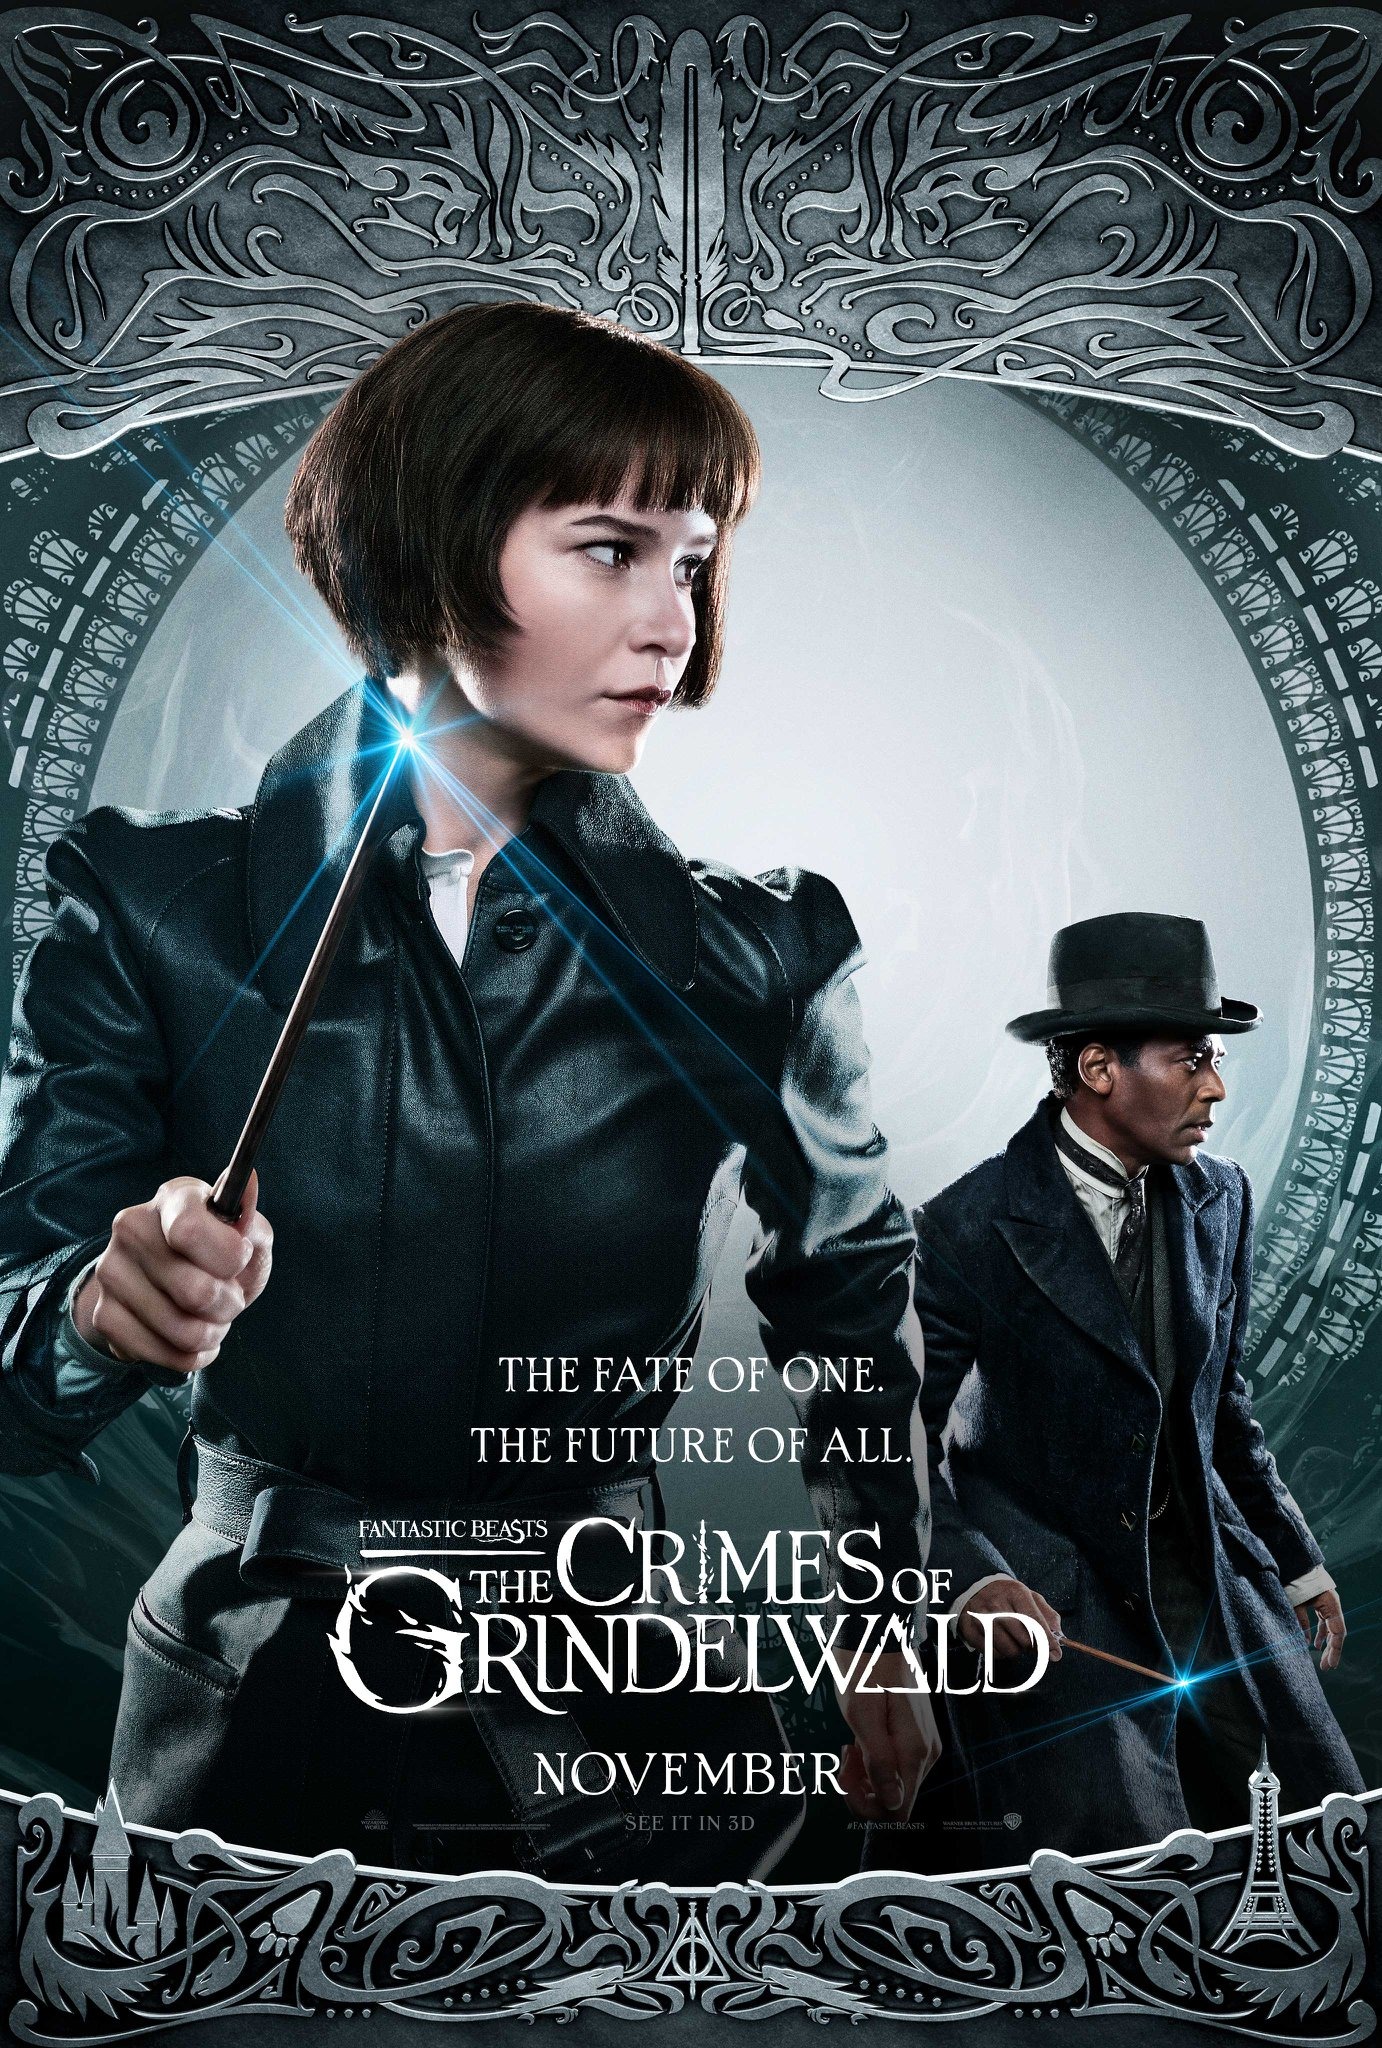 Mega Sized Movie Poster Image for Fantastic Beasts: The Crimes of Grindelwald (#16 of 32)